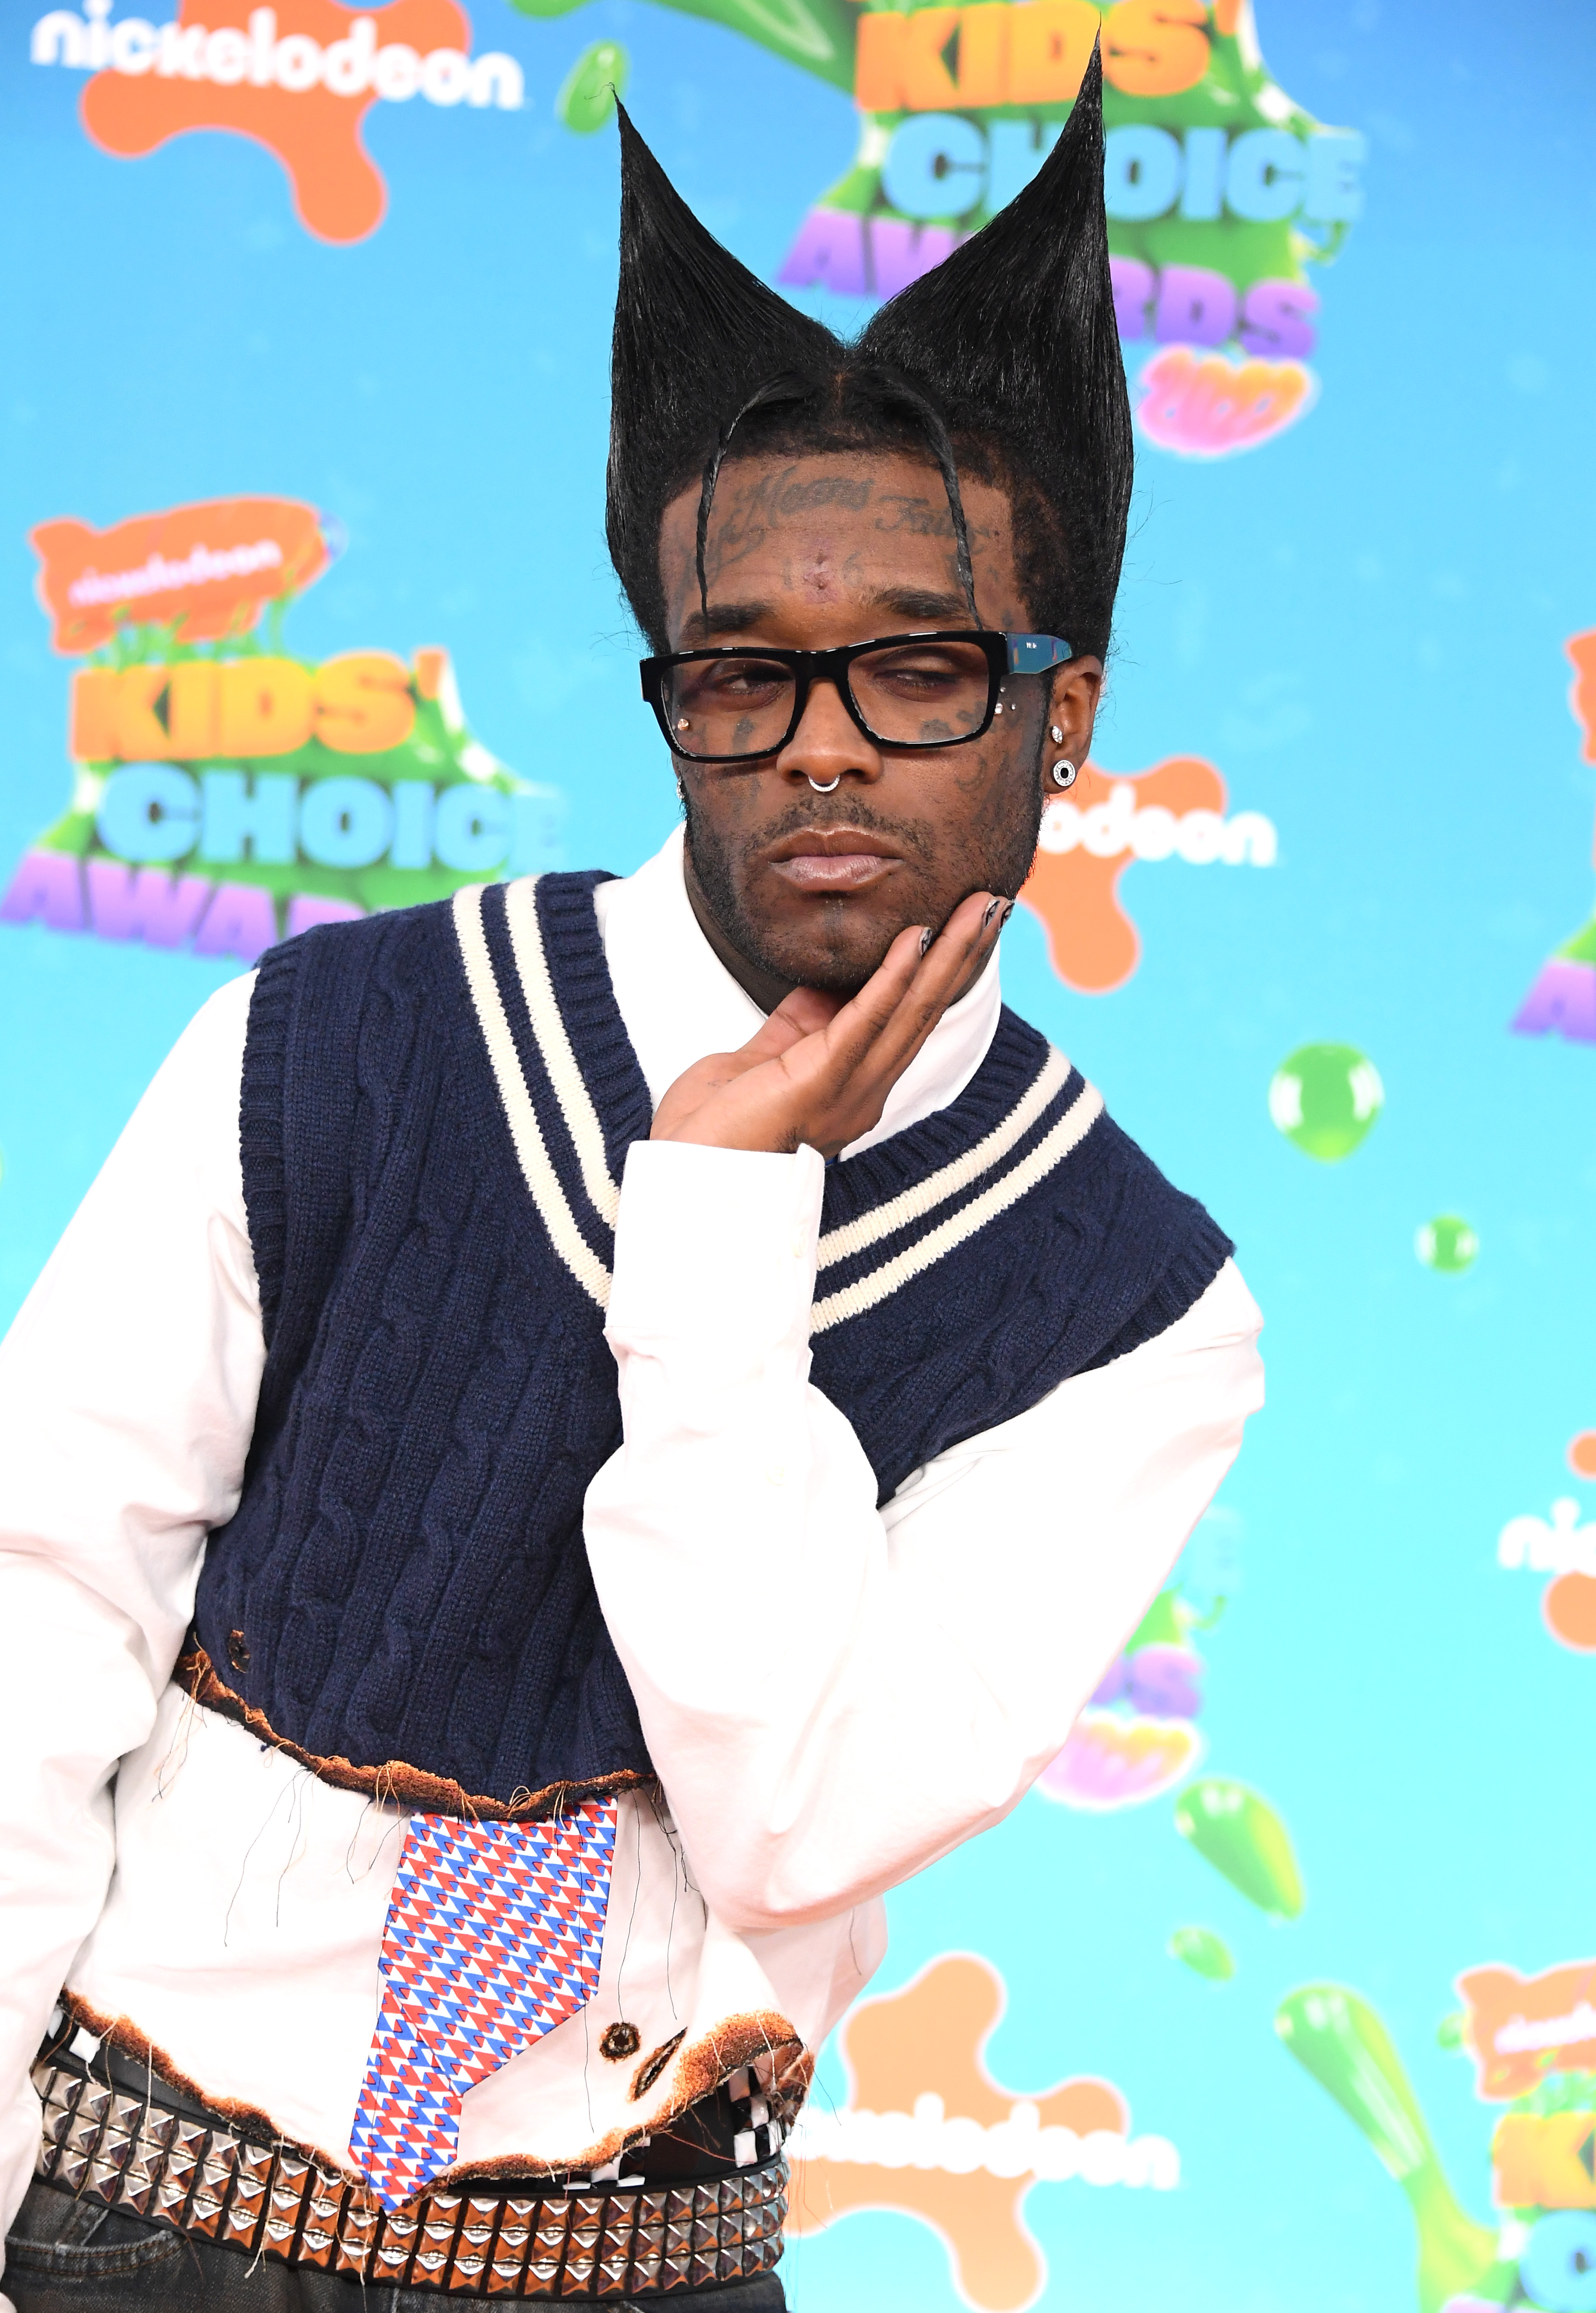 Lil Uzi Vert arrives at the Nickelodeon's 2023 Kids' Choice Awards at Microsoft Theater on March 4, 2023, in Los Angeles, California. | Source: Getty Images